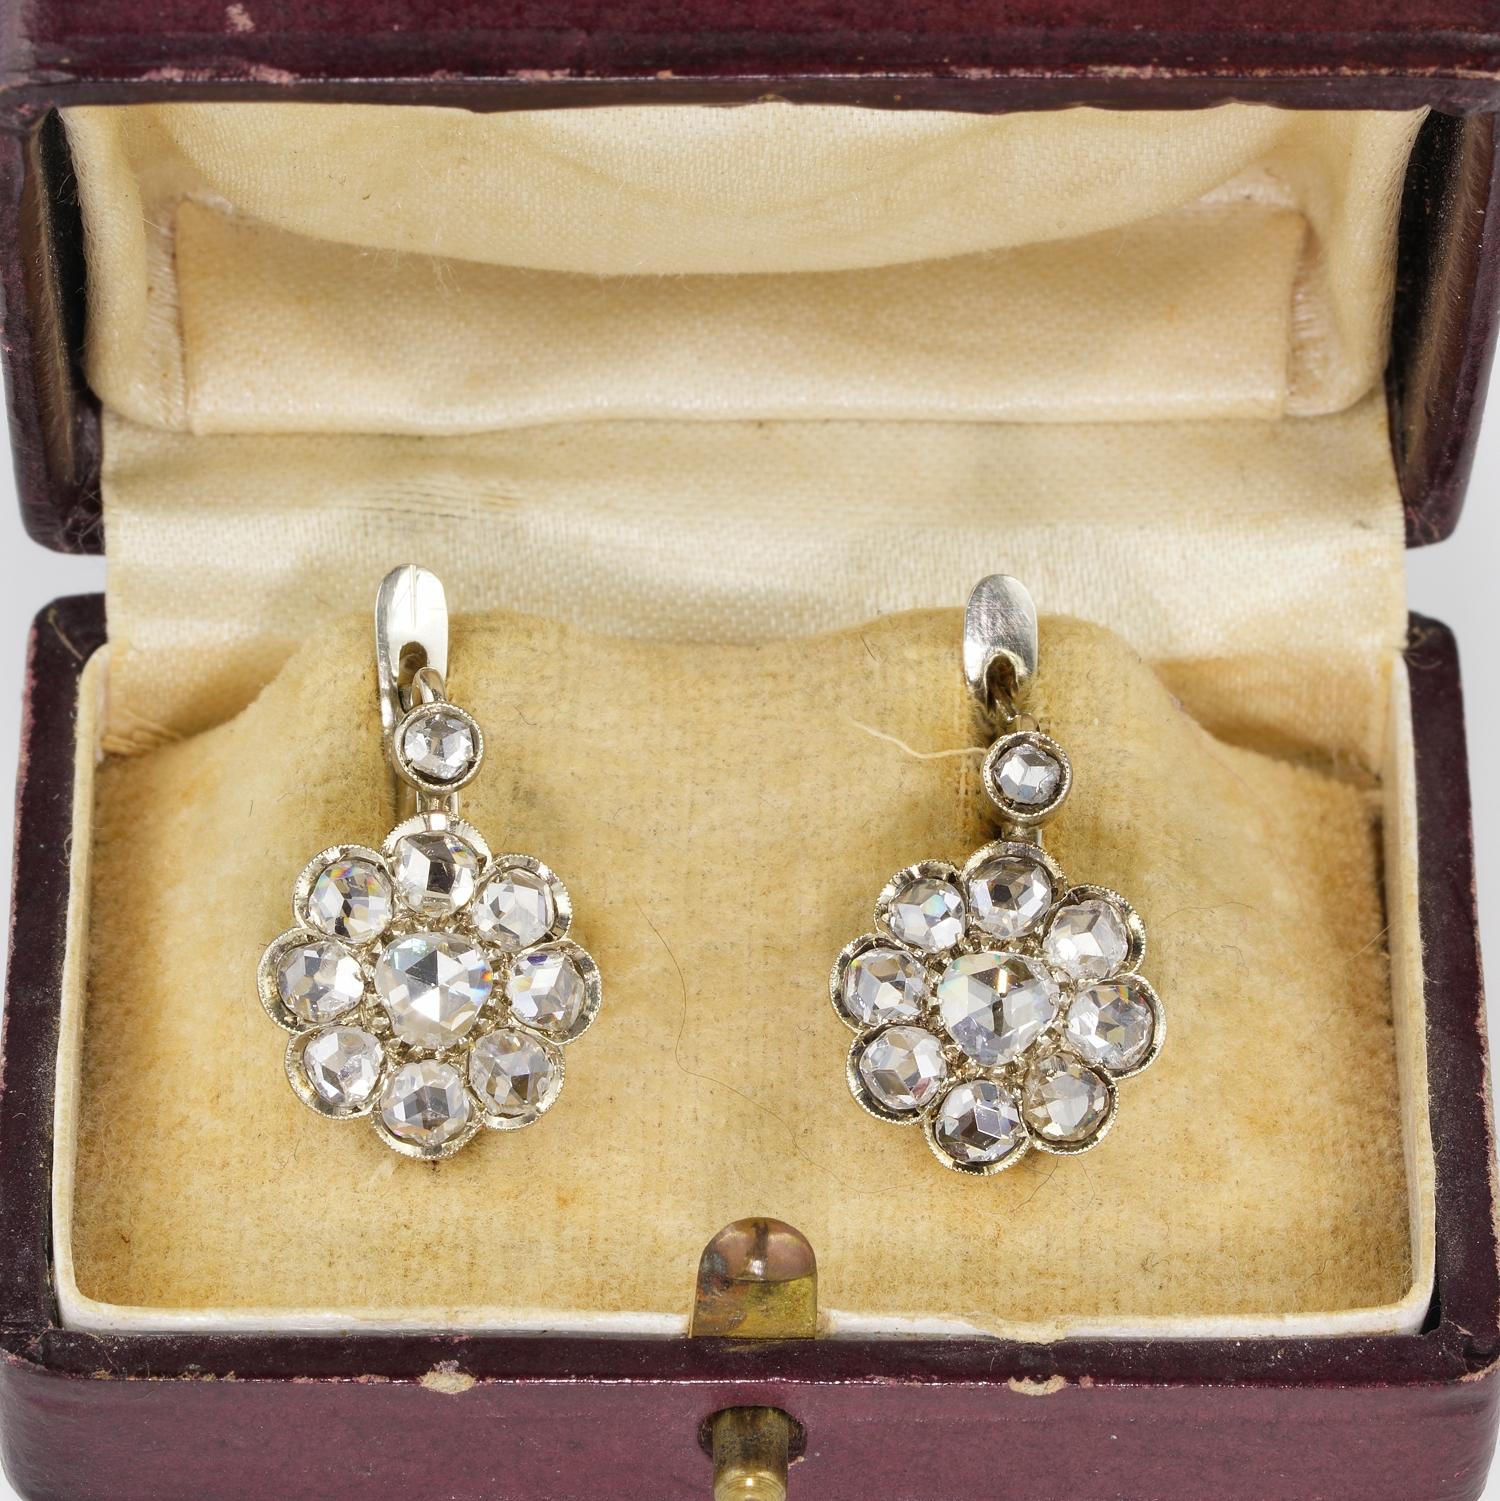 Be in the Edwardian Era!

Spectacular pair of Diamond drop earrings set in 12 KT white gold, they date 1915 ca
Gorgeous size with pretty swing given by the drop made design in vogue at the time
They sparkle and attract the attention for the tasteful